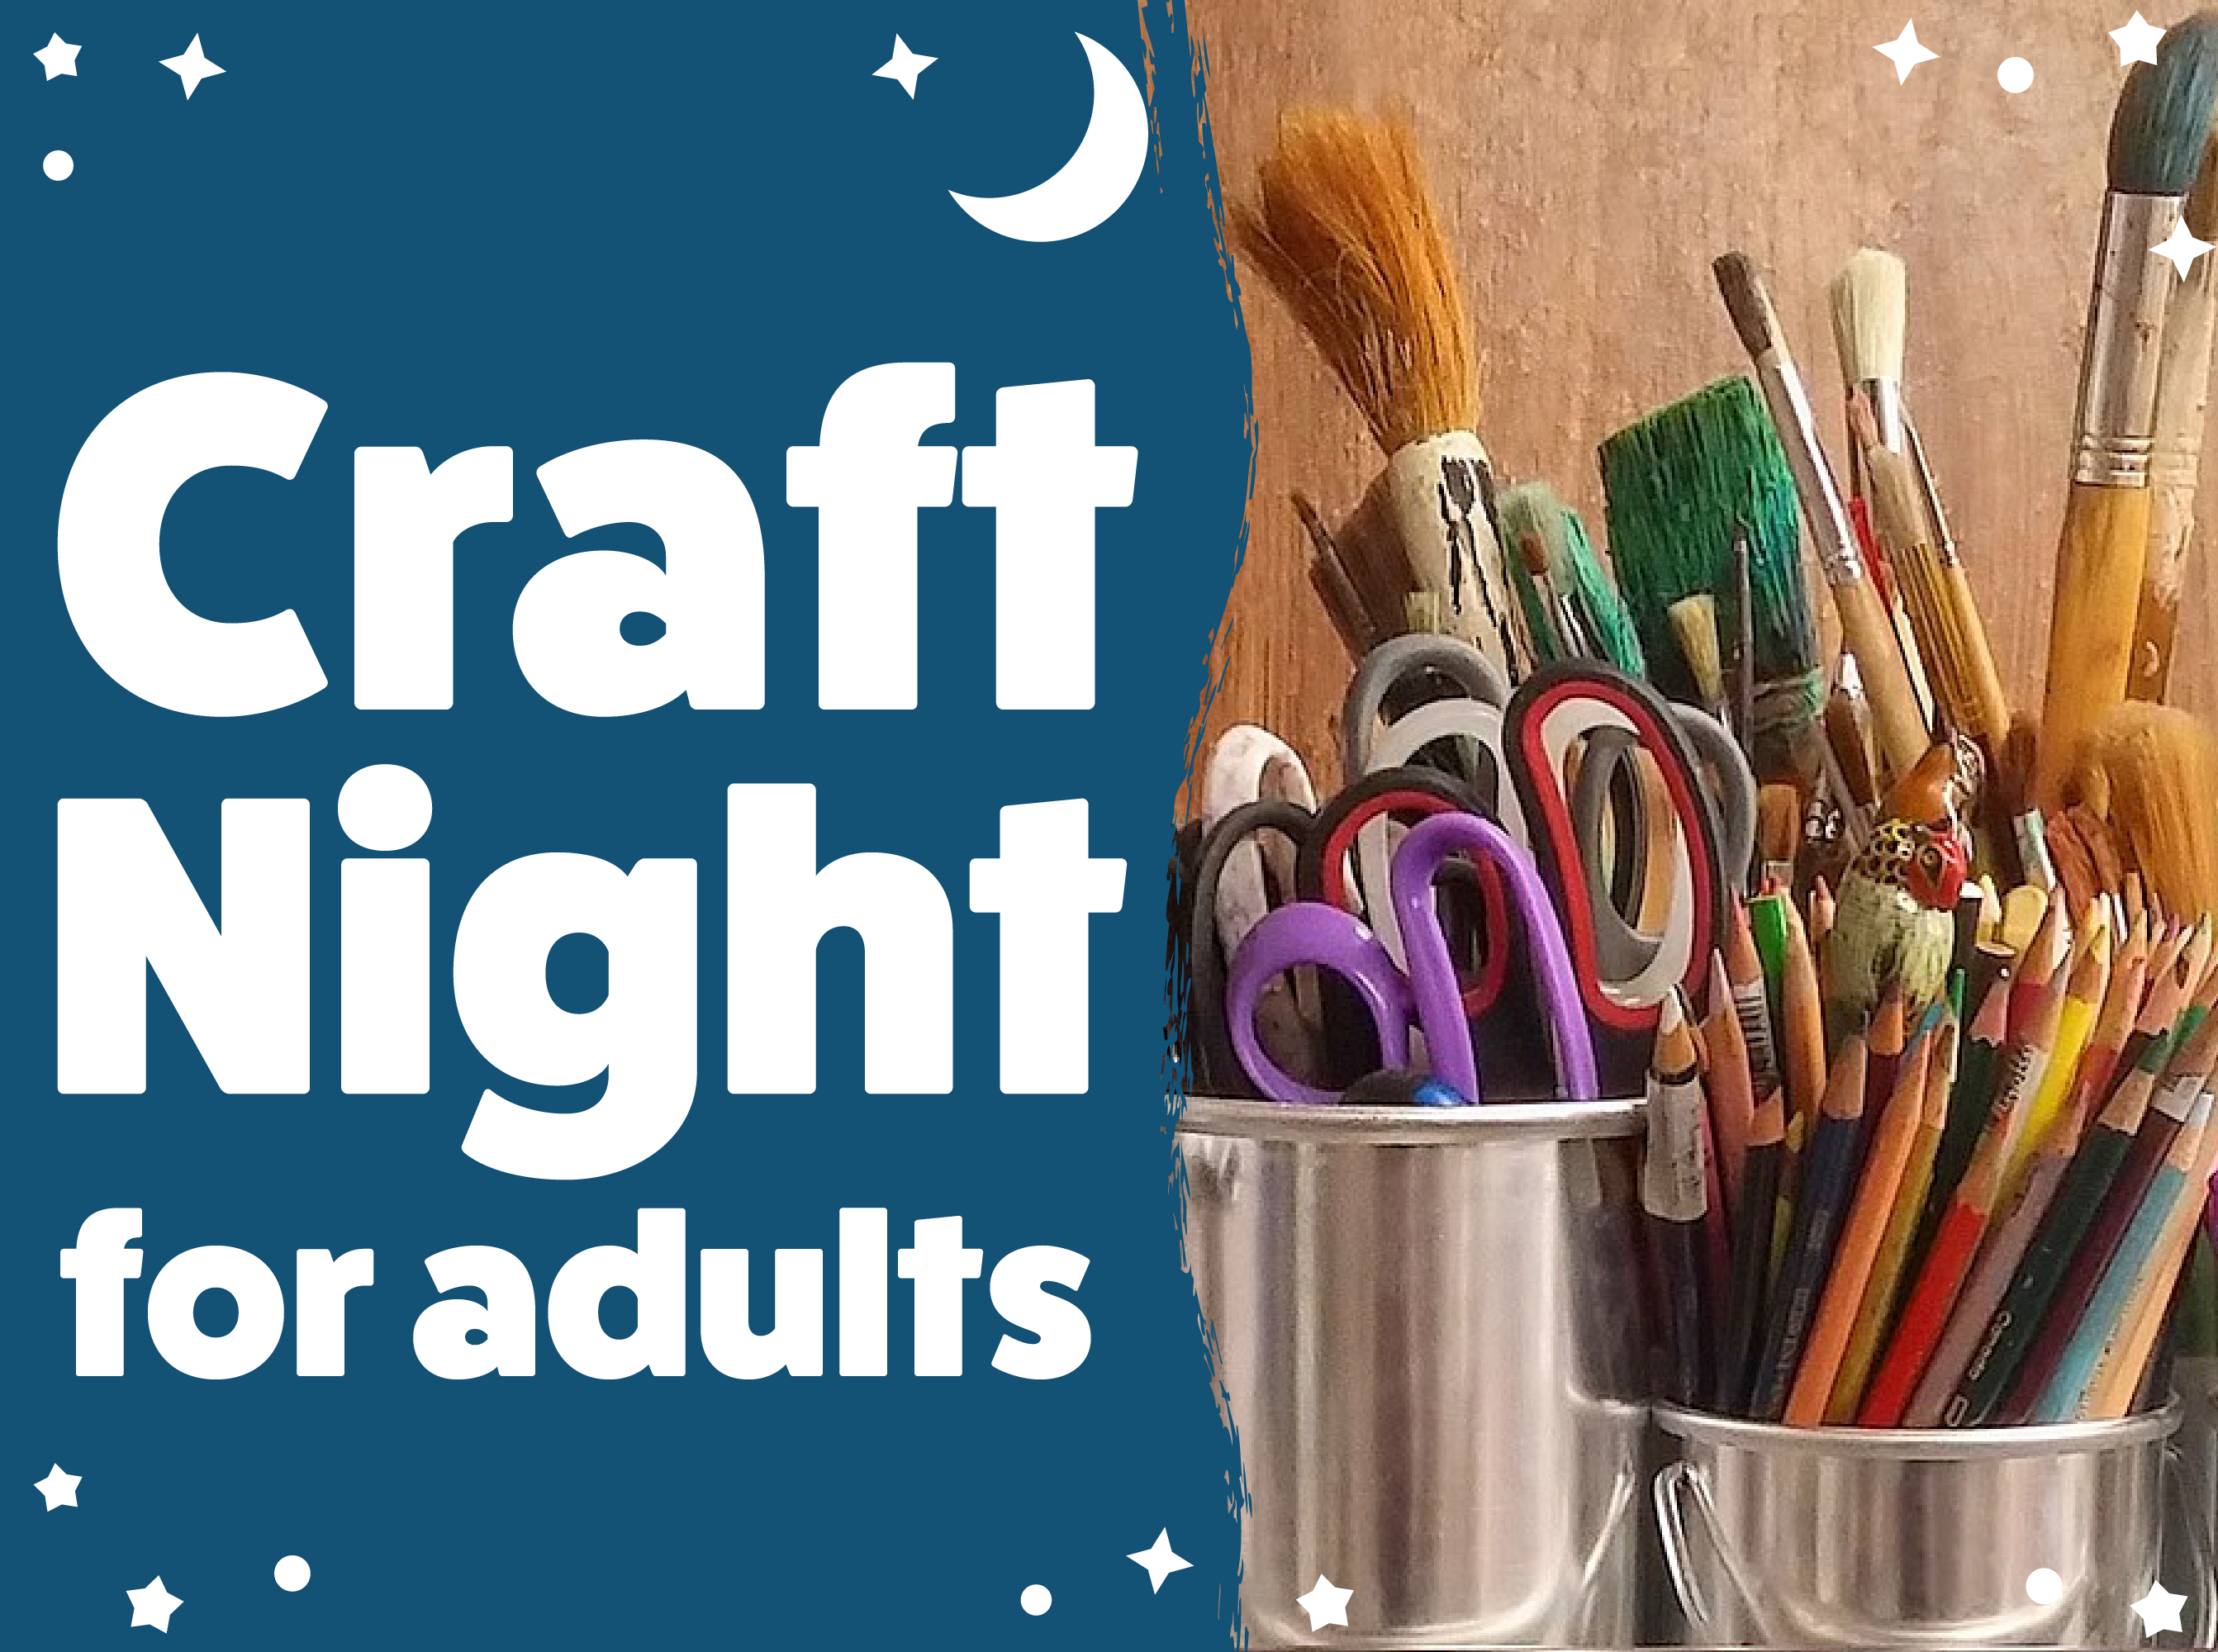 Craft Night for adults